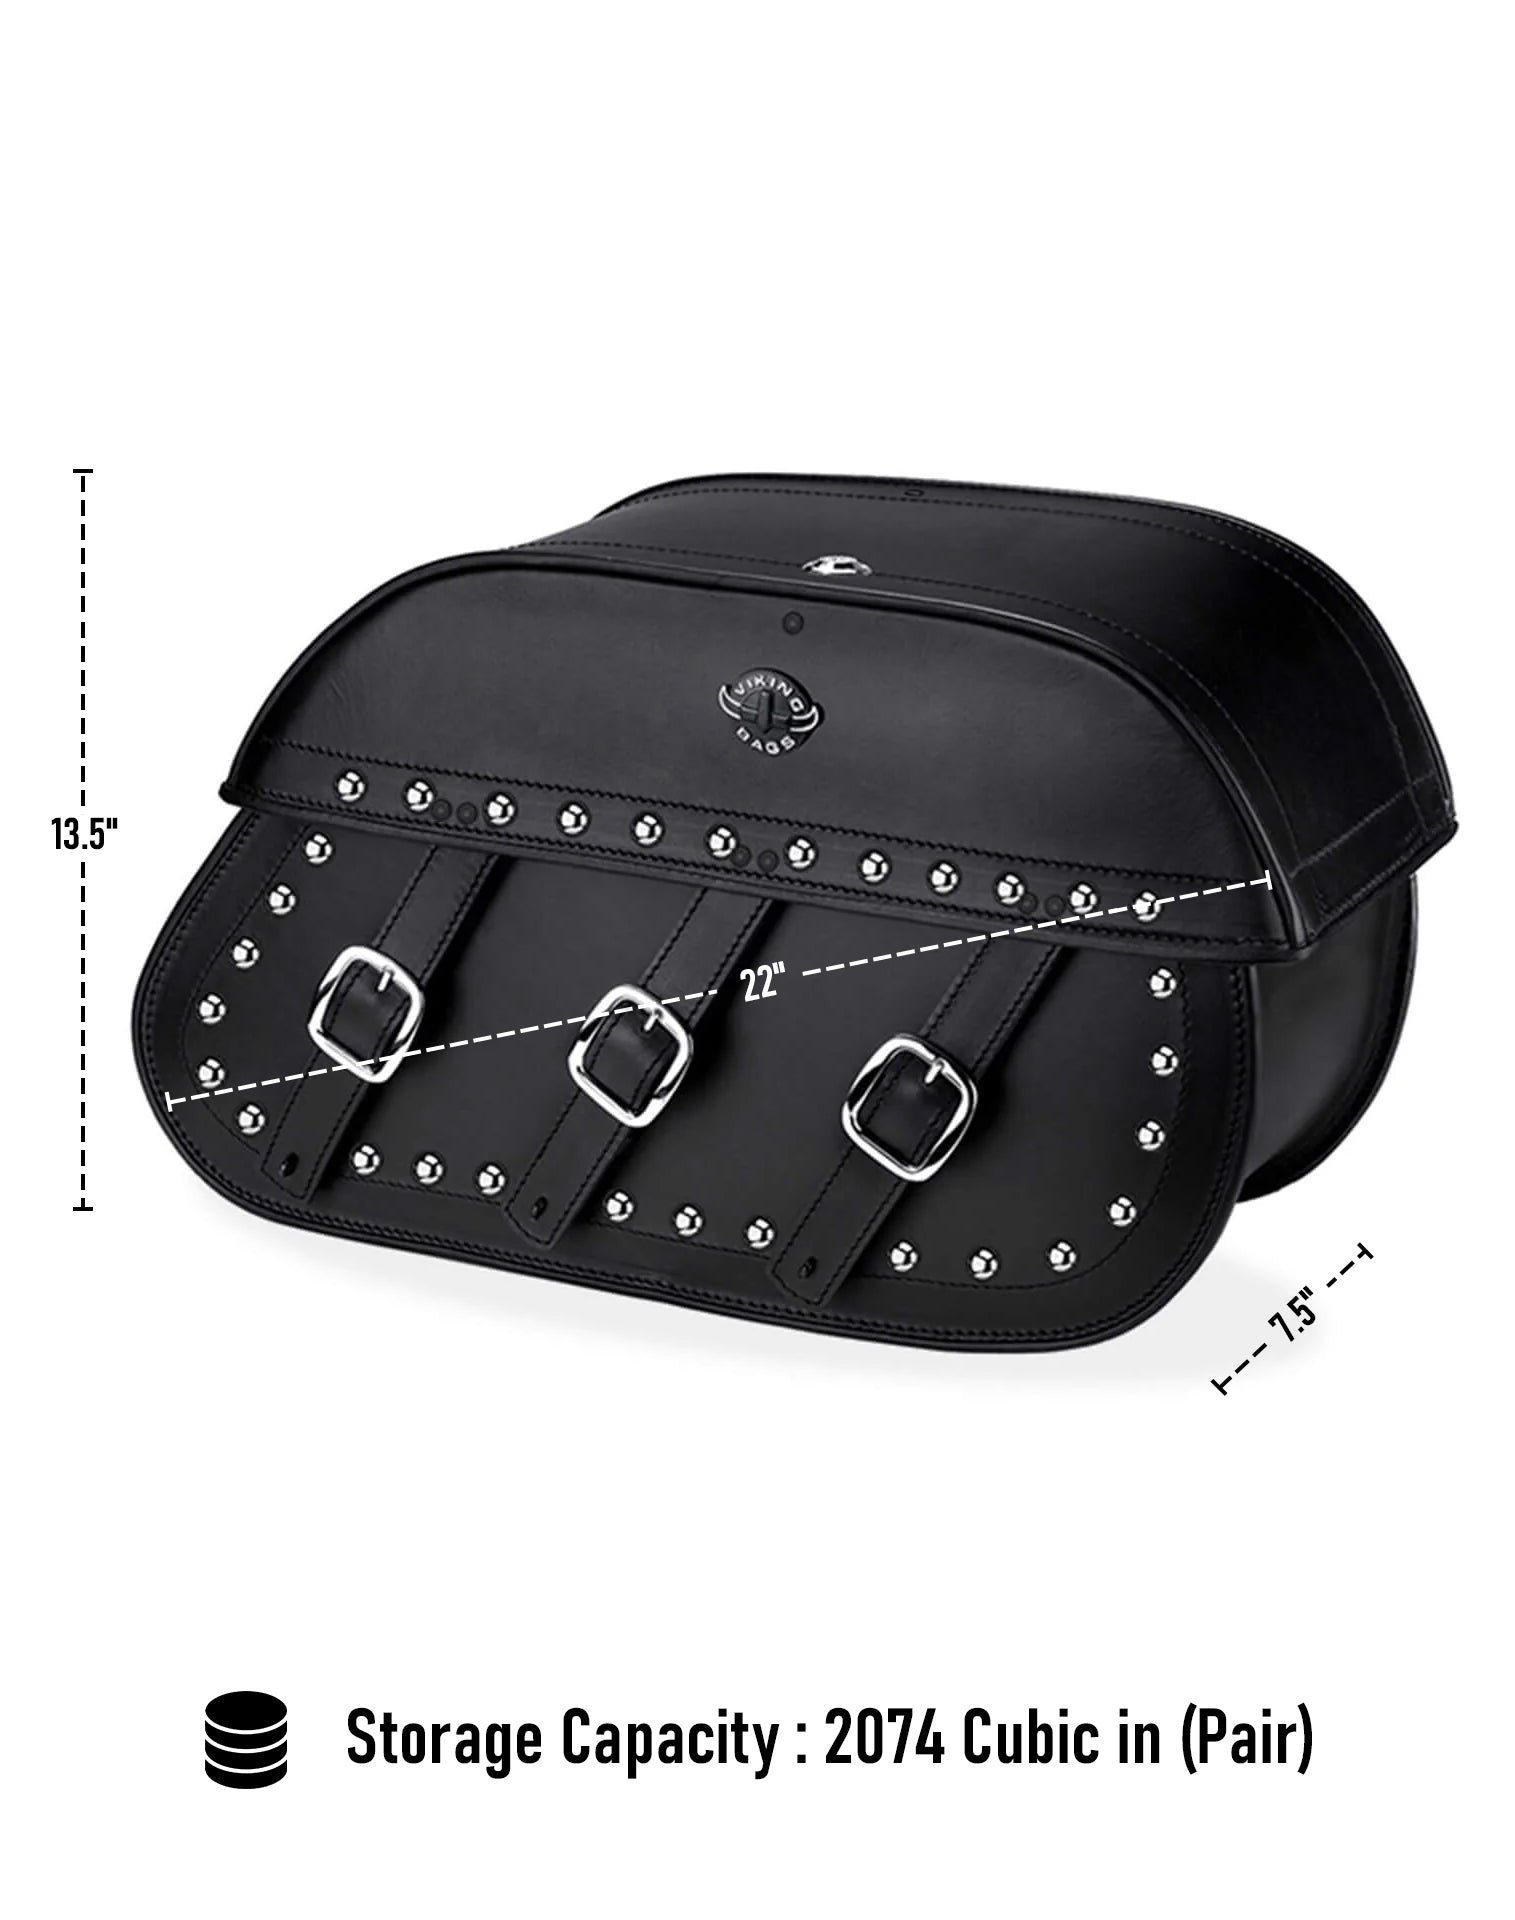 Viking Trianon Extra Large Yamaha V Star 950 Studded Leather Motorcycle Saddlebags Can Store Your Ridings Gears